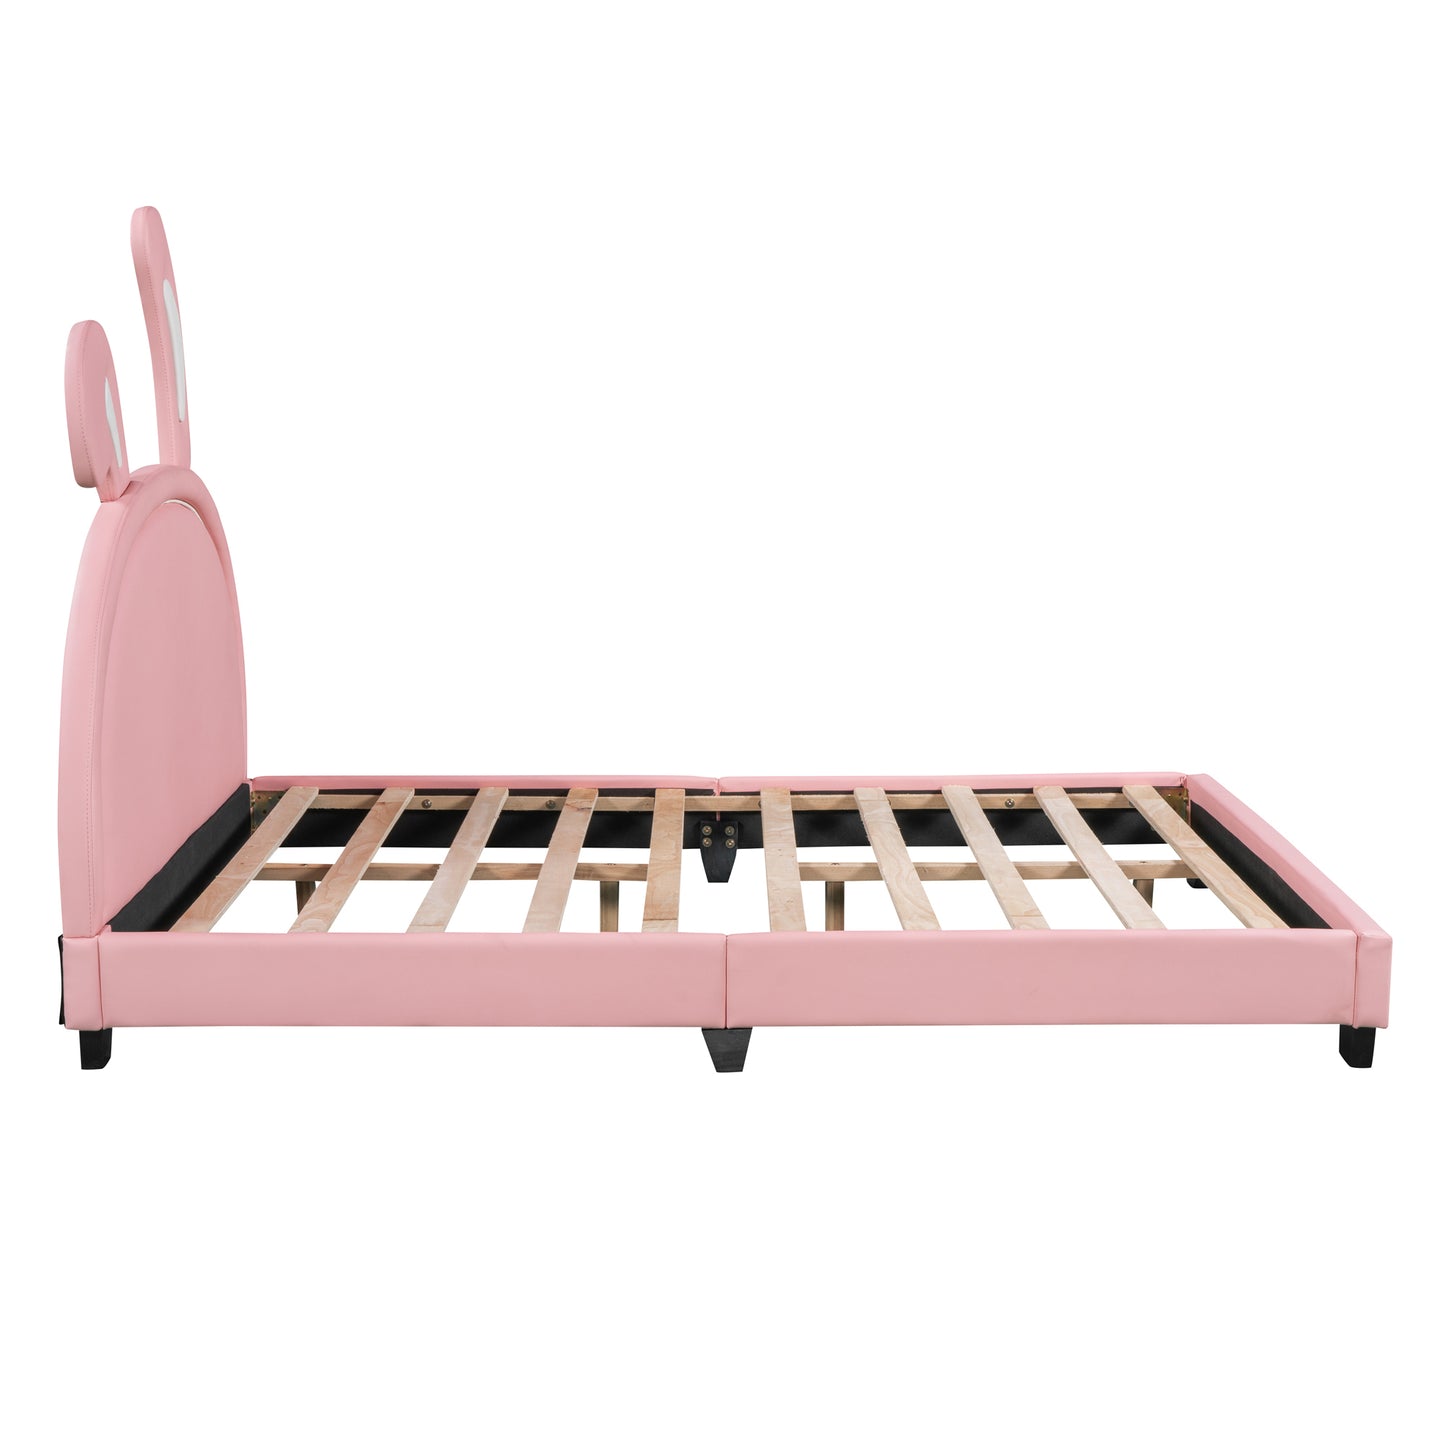 Full Size Upholstered Leather Platform Bed with Rabbit Ornament, Pink